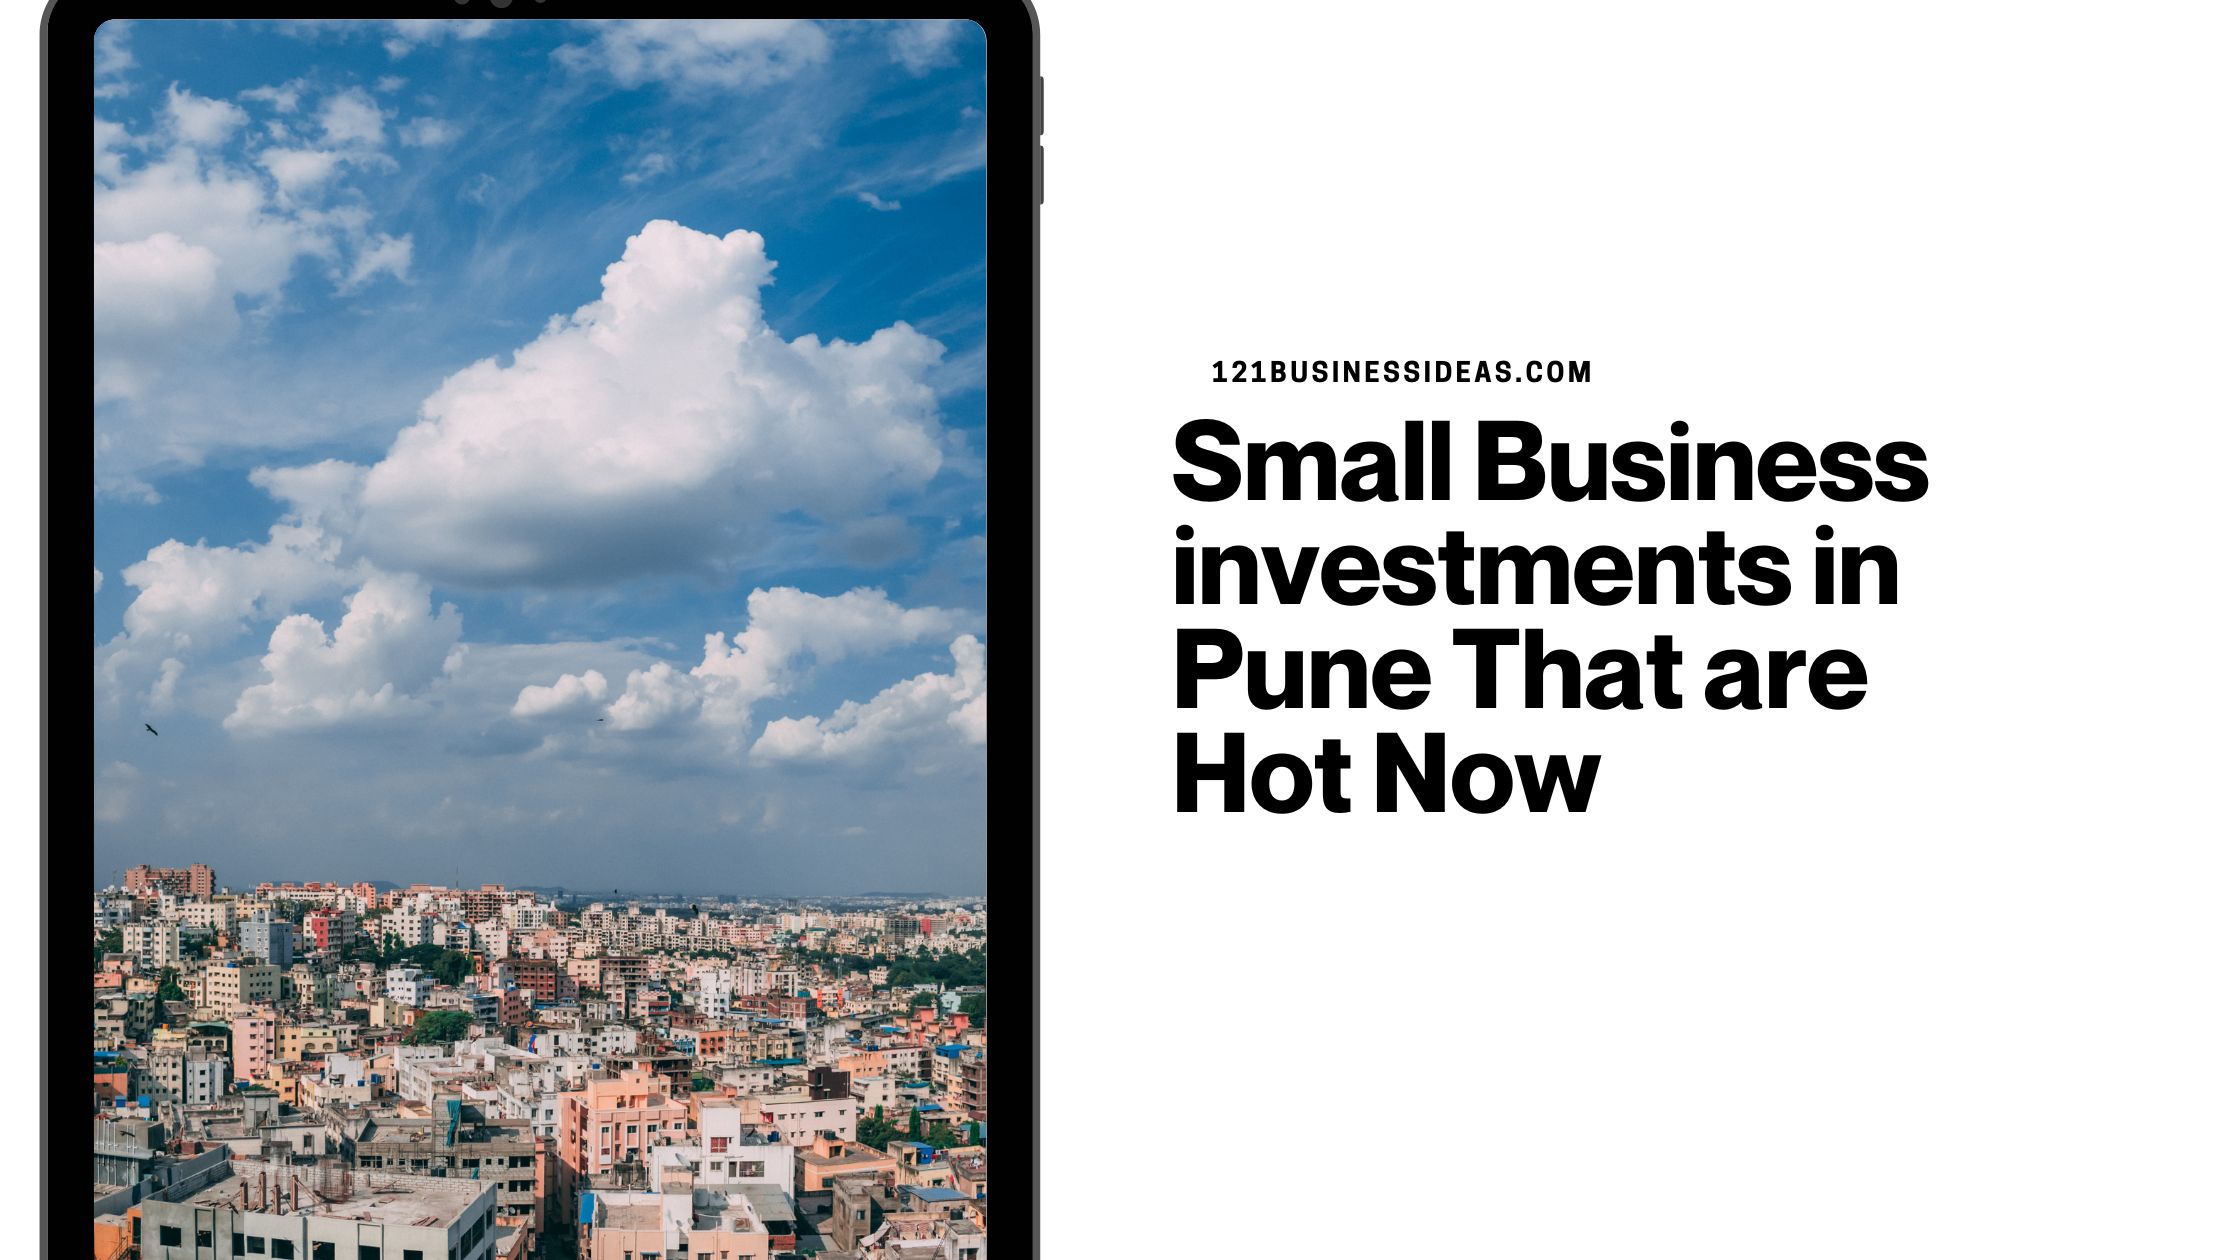 Small Business investments in Pune That are Hot Now